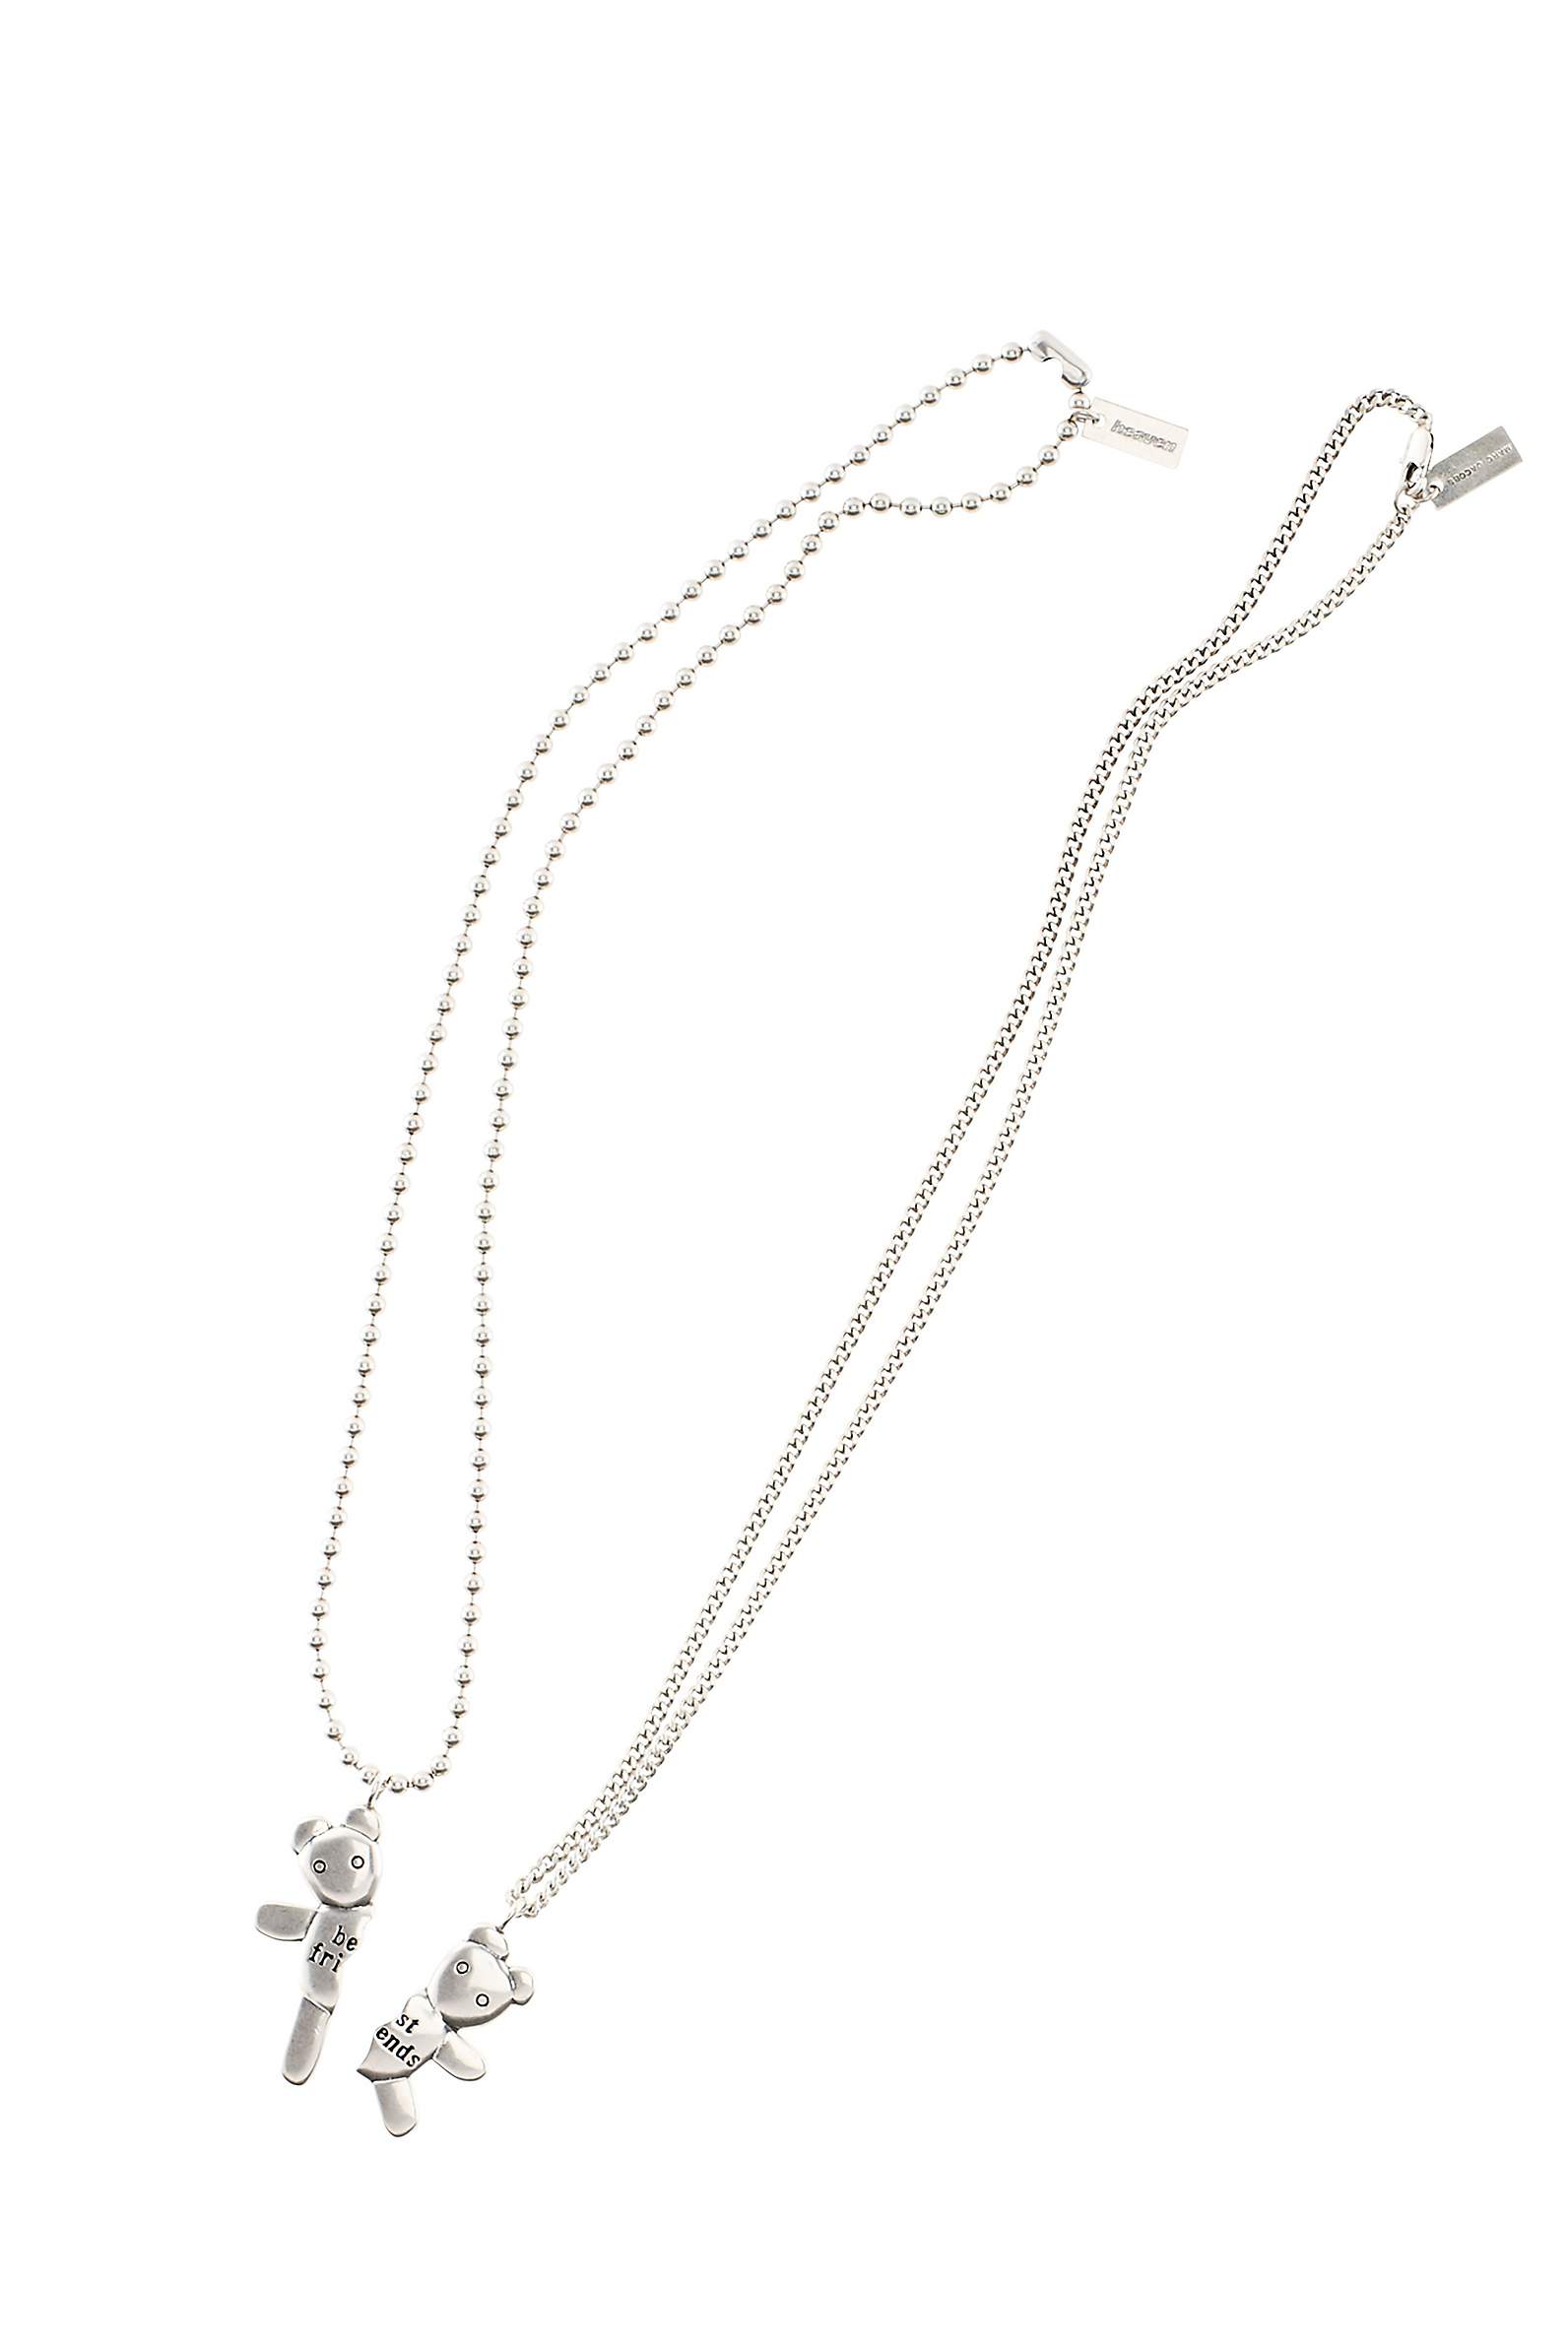 heaven BY MARCJACOBS friendship necklace